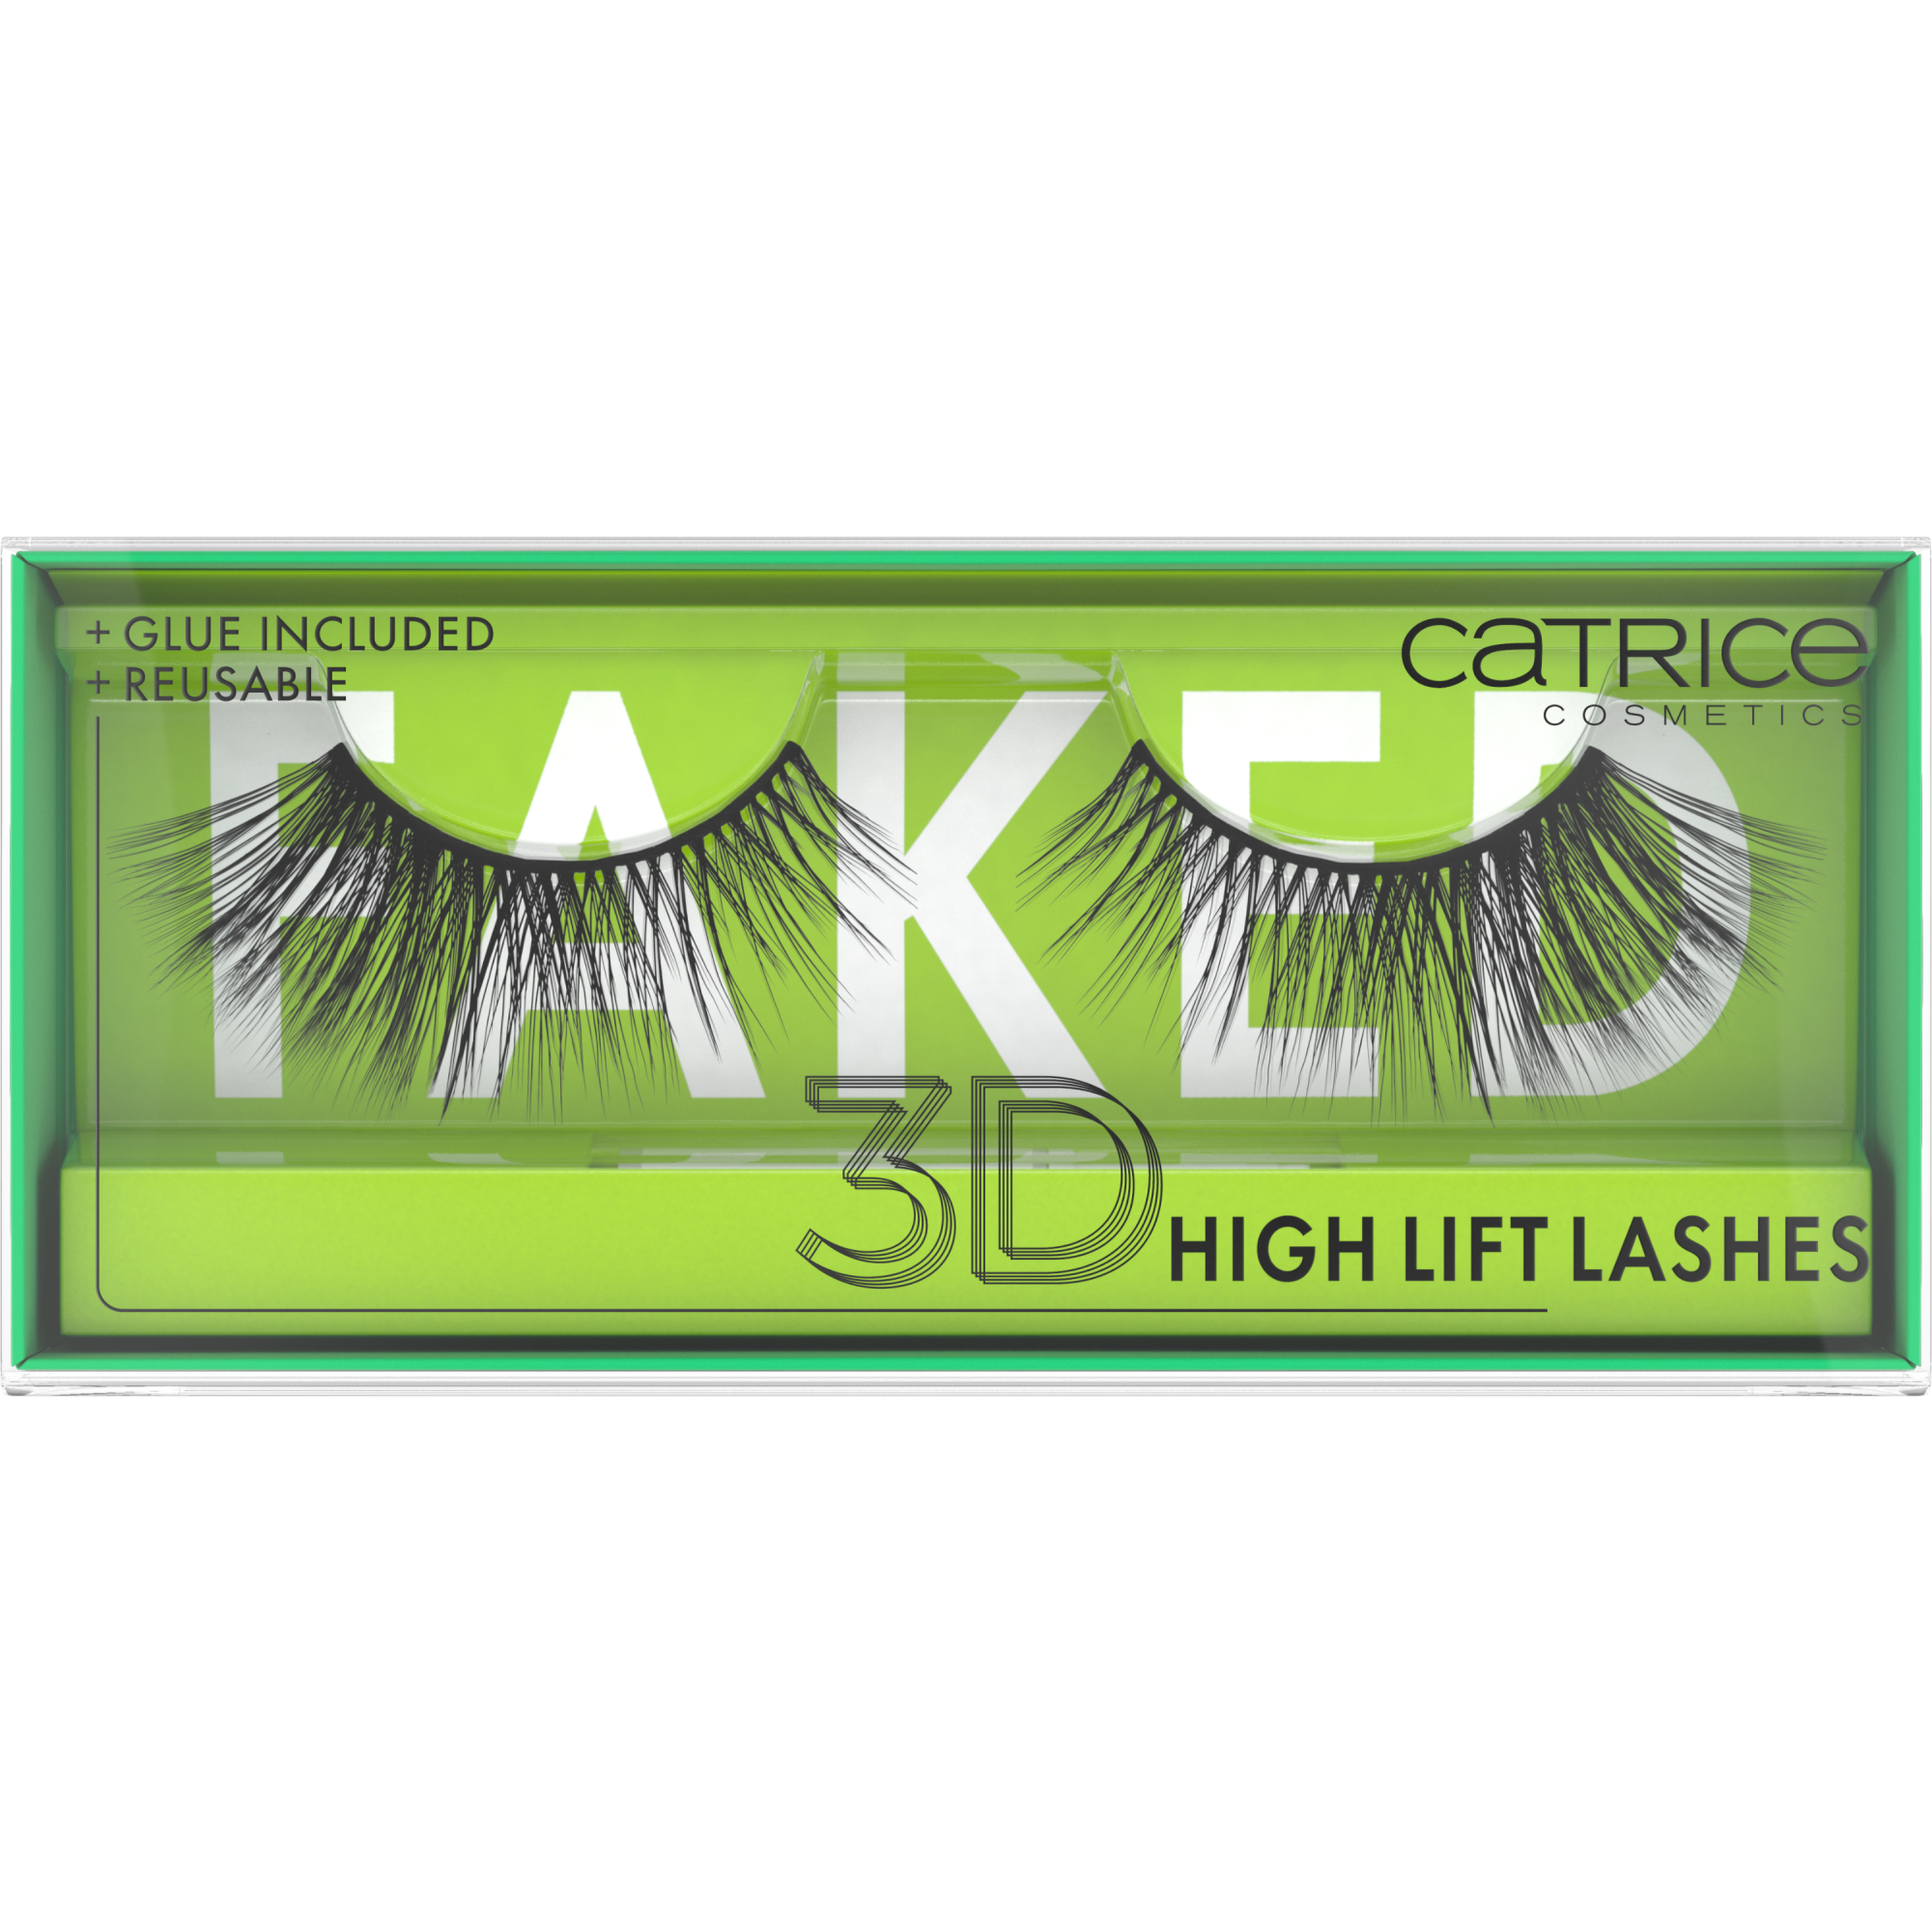 Faked 3D High Lift Lashes